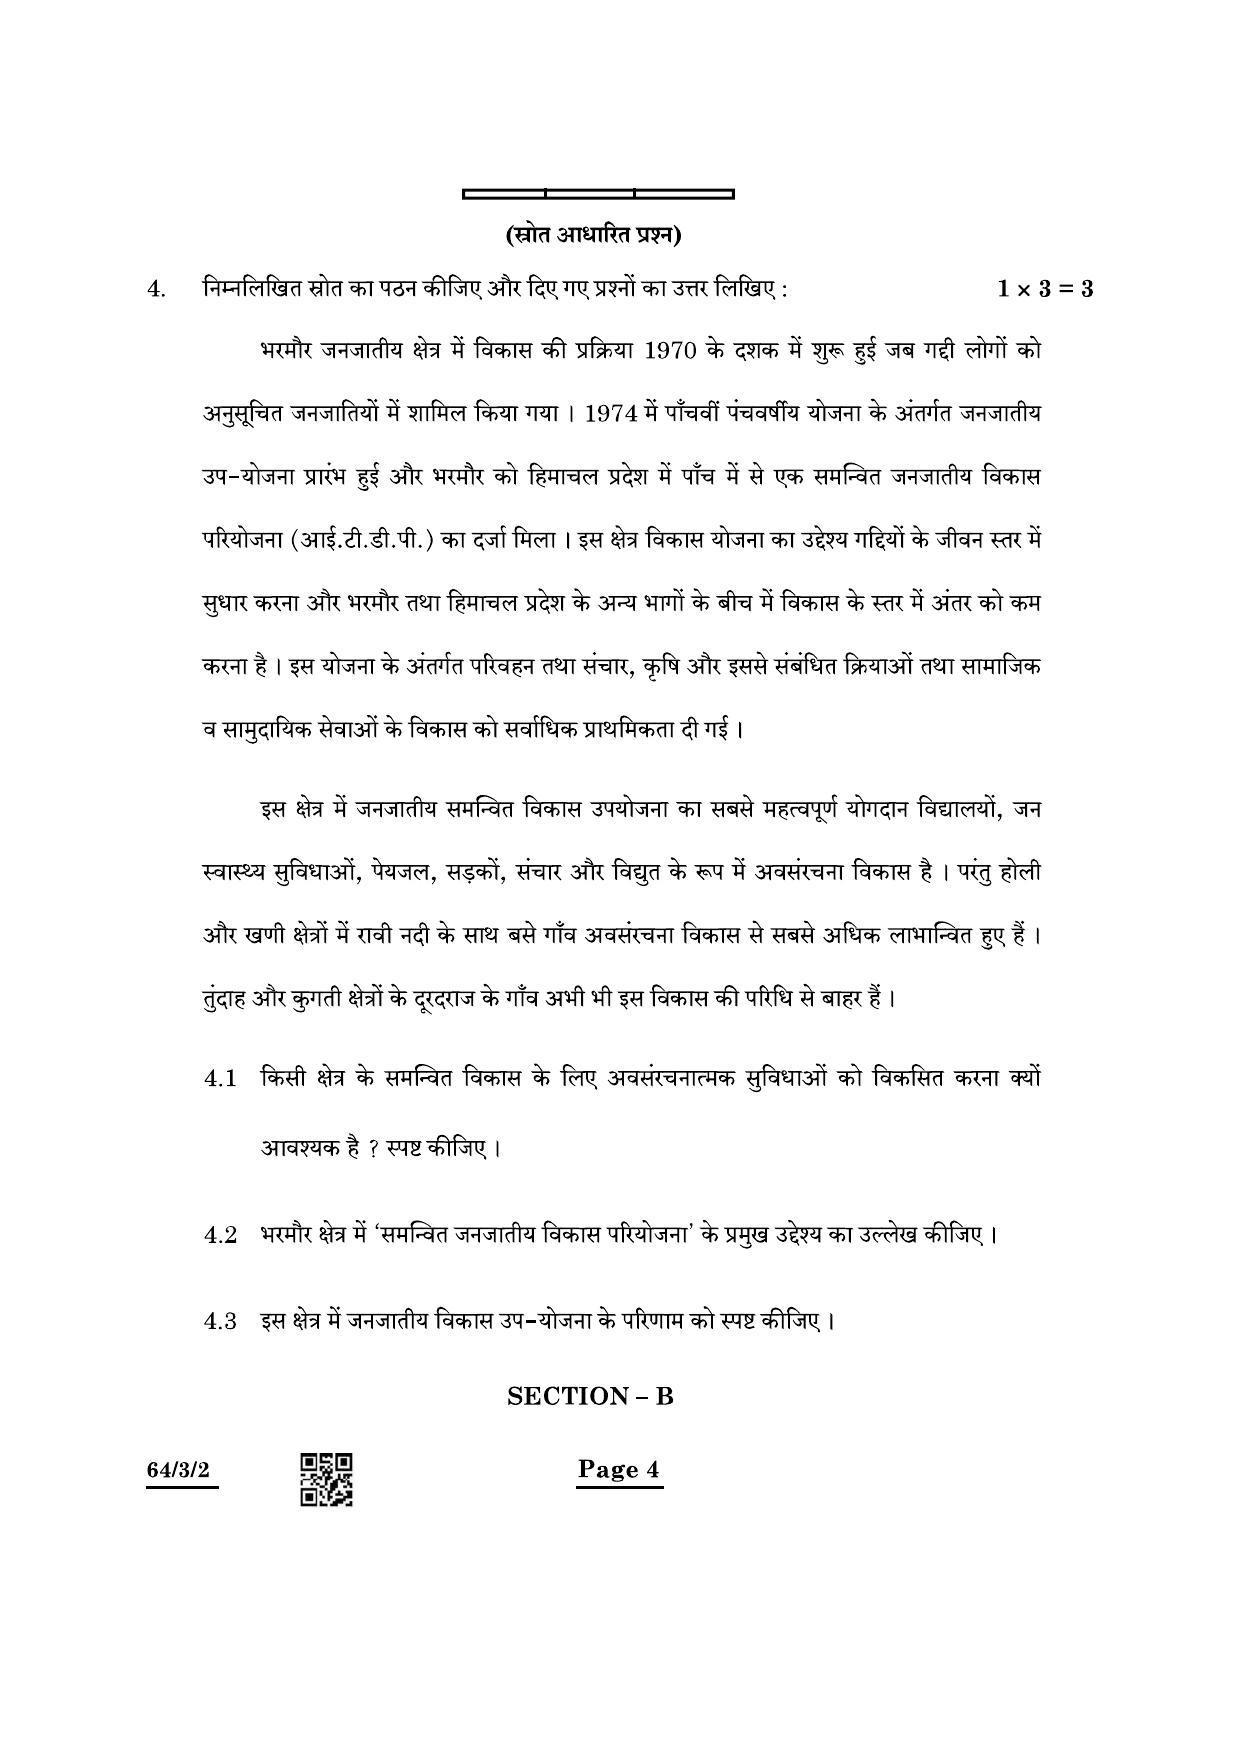 CBSE Class 12 64-3-2 Geography 2022 Question Paper - Page 4